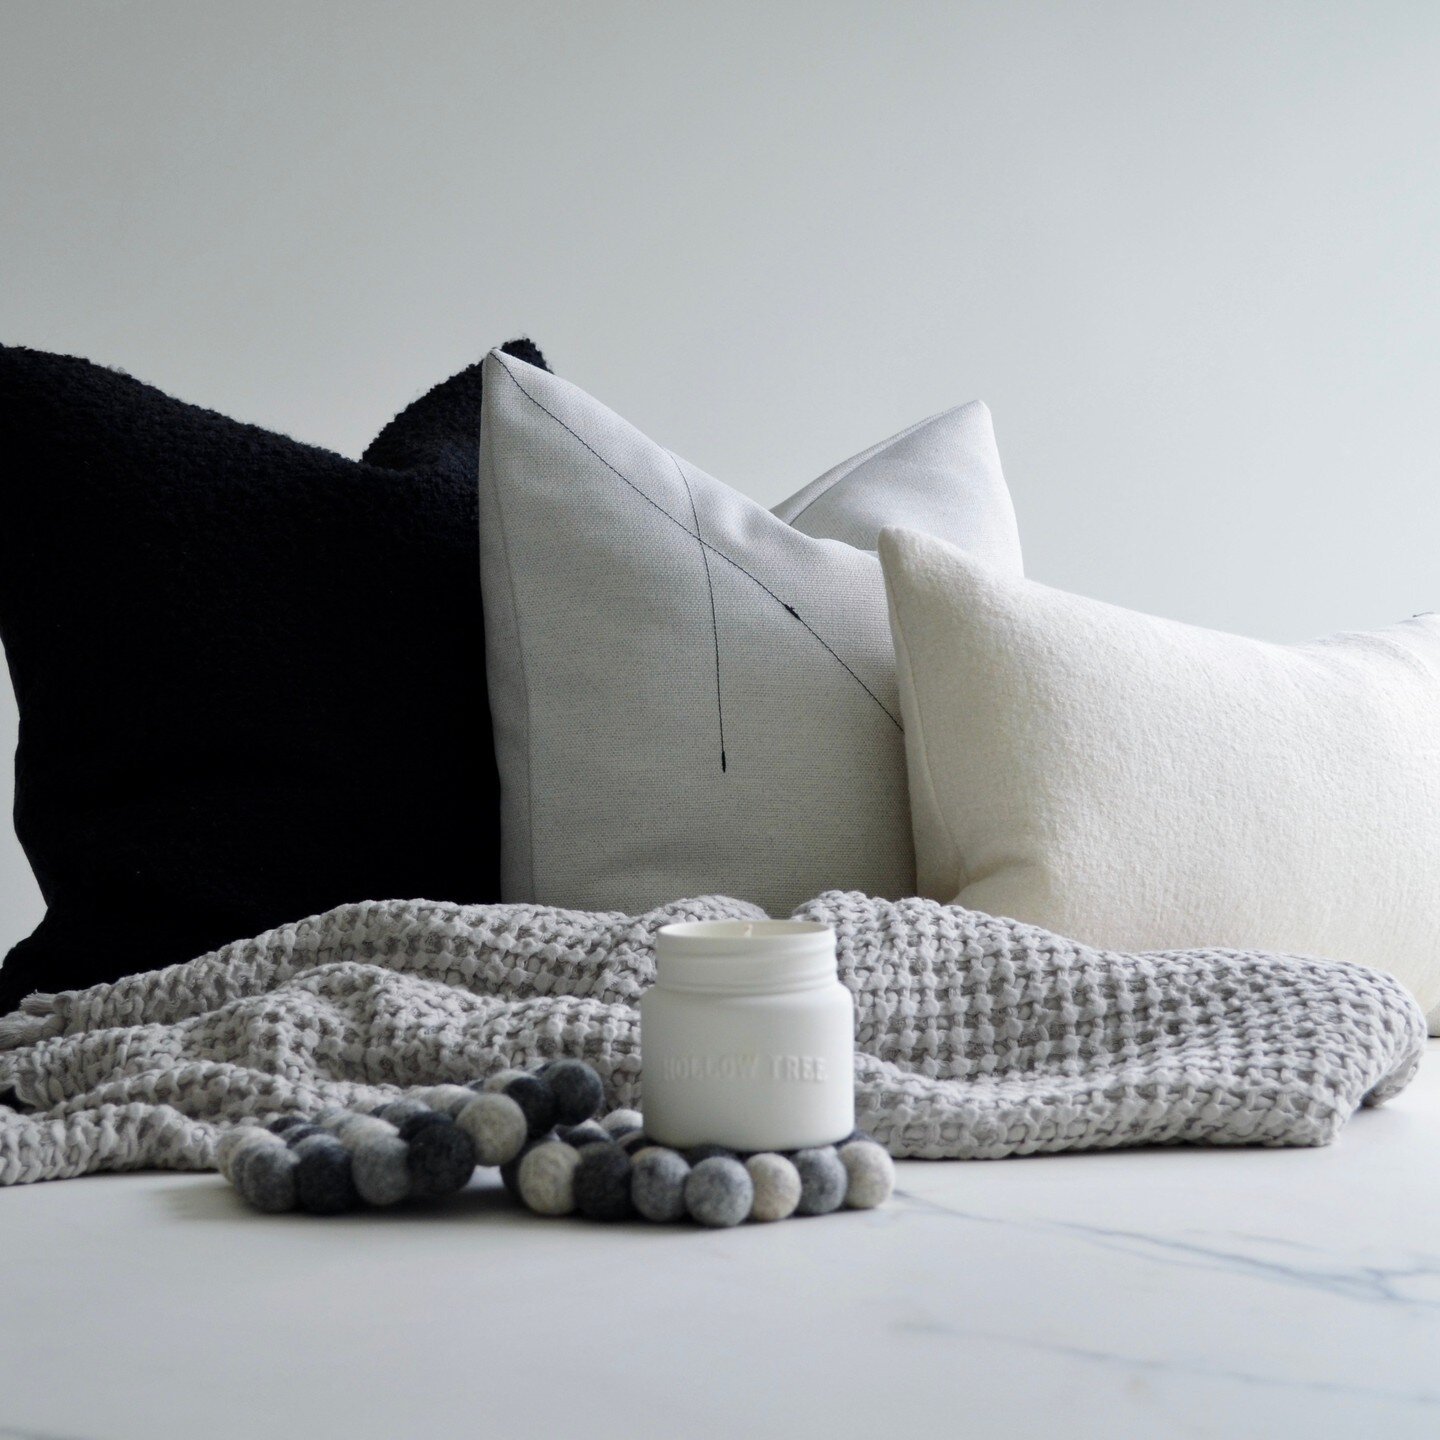 get your first class ticket to easy, breezy vibes with our live a lot styling kit 🍃🌀 ⁠
⁠
lounge into three textured pillows, a lightweight waffle blanket, two woolly-ball coasters and a gorgeous scented candle. all just in time to chill into your s